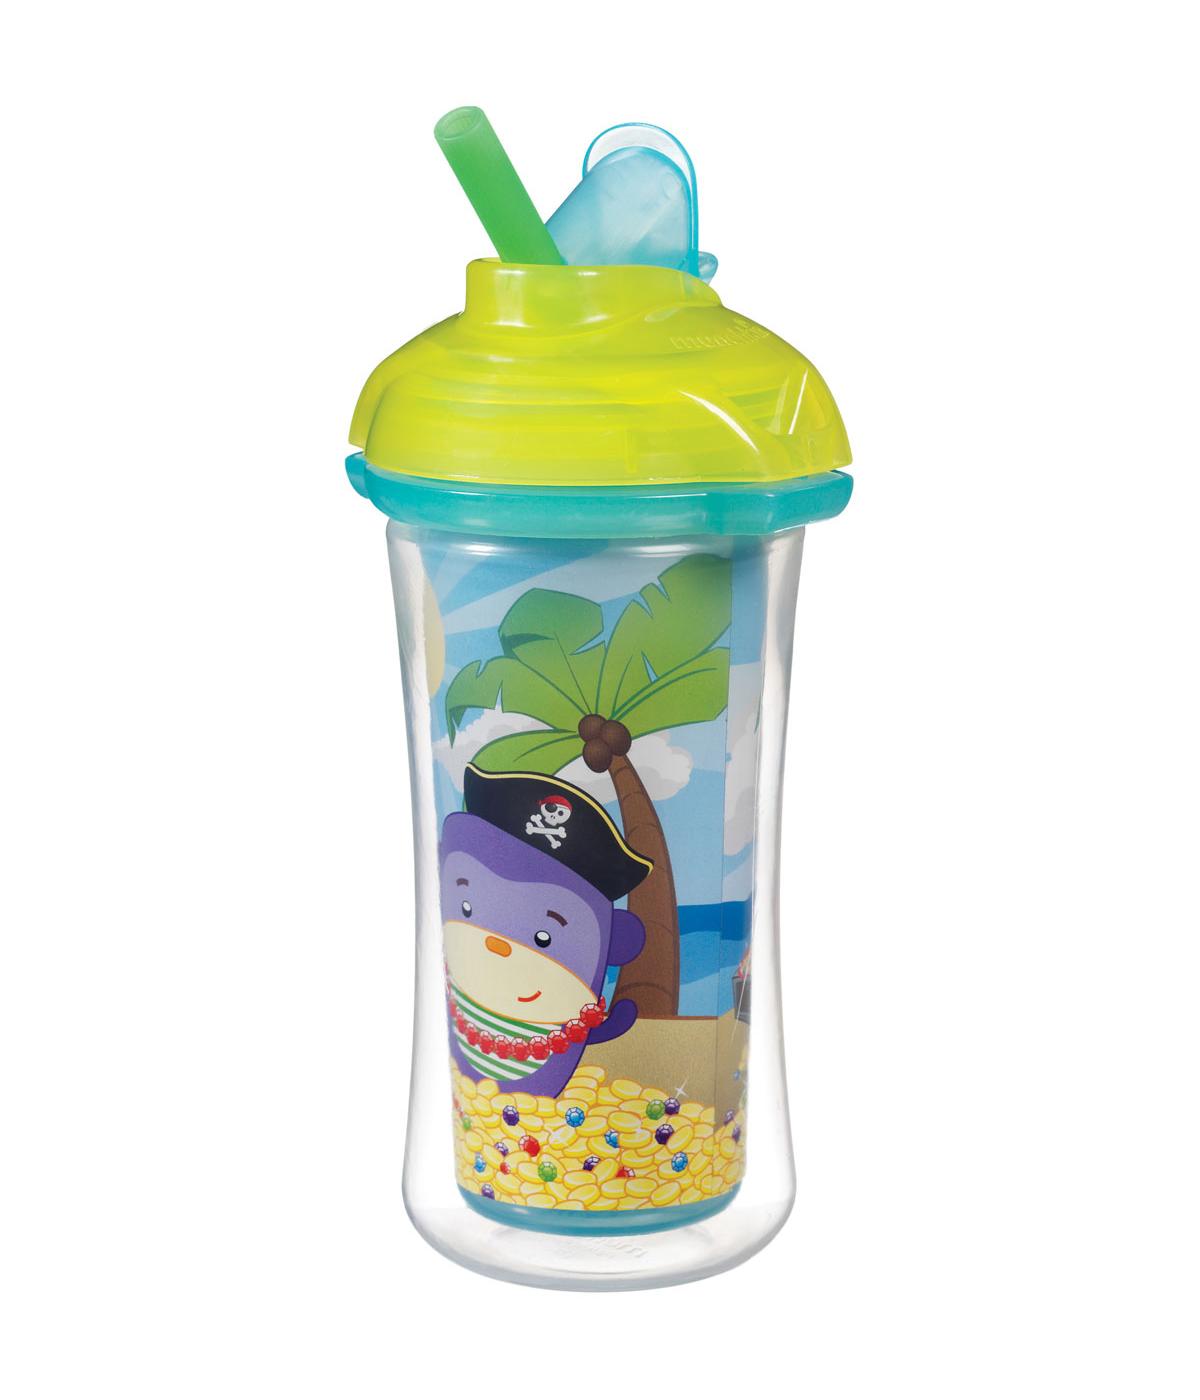 Sesame Street Click Lock Insulated Sippy Cups 2 pack - 9 oz